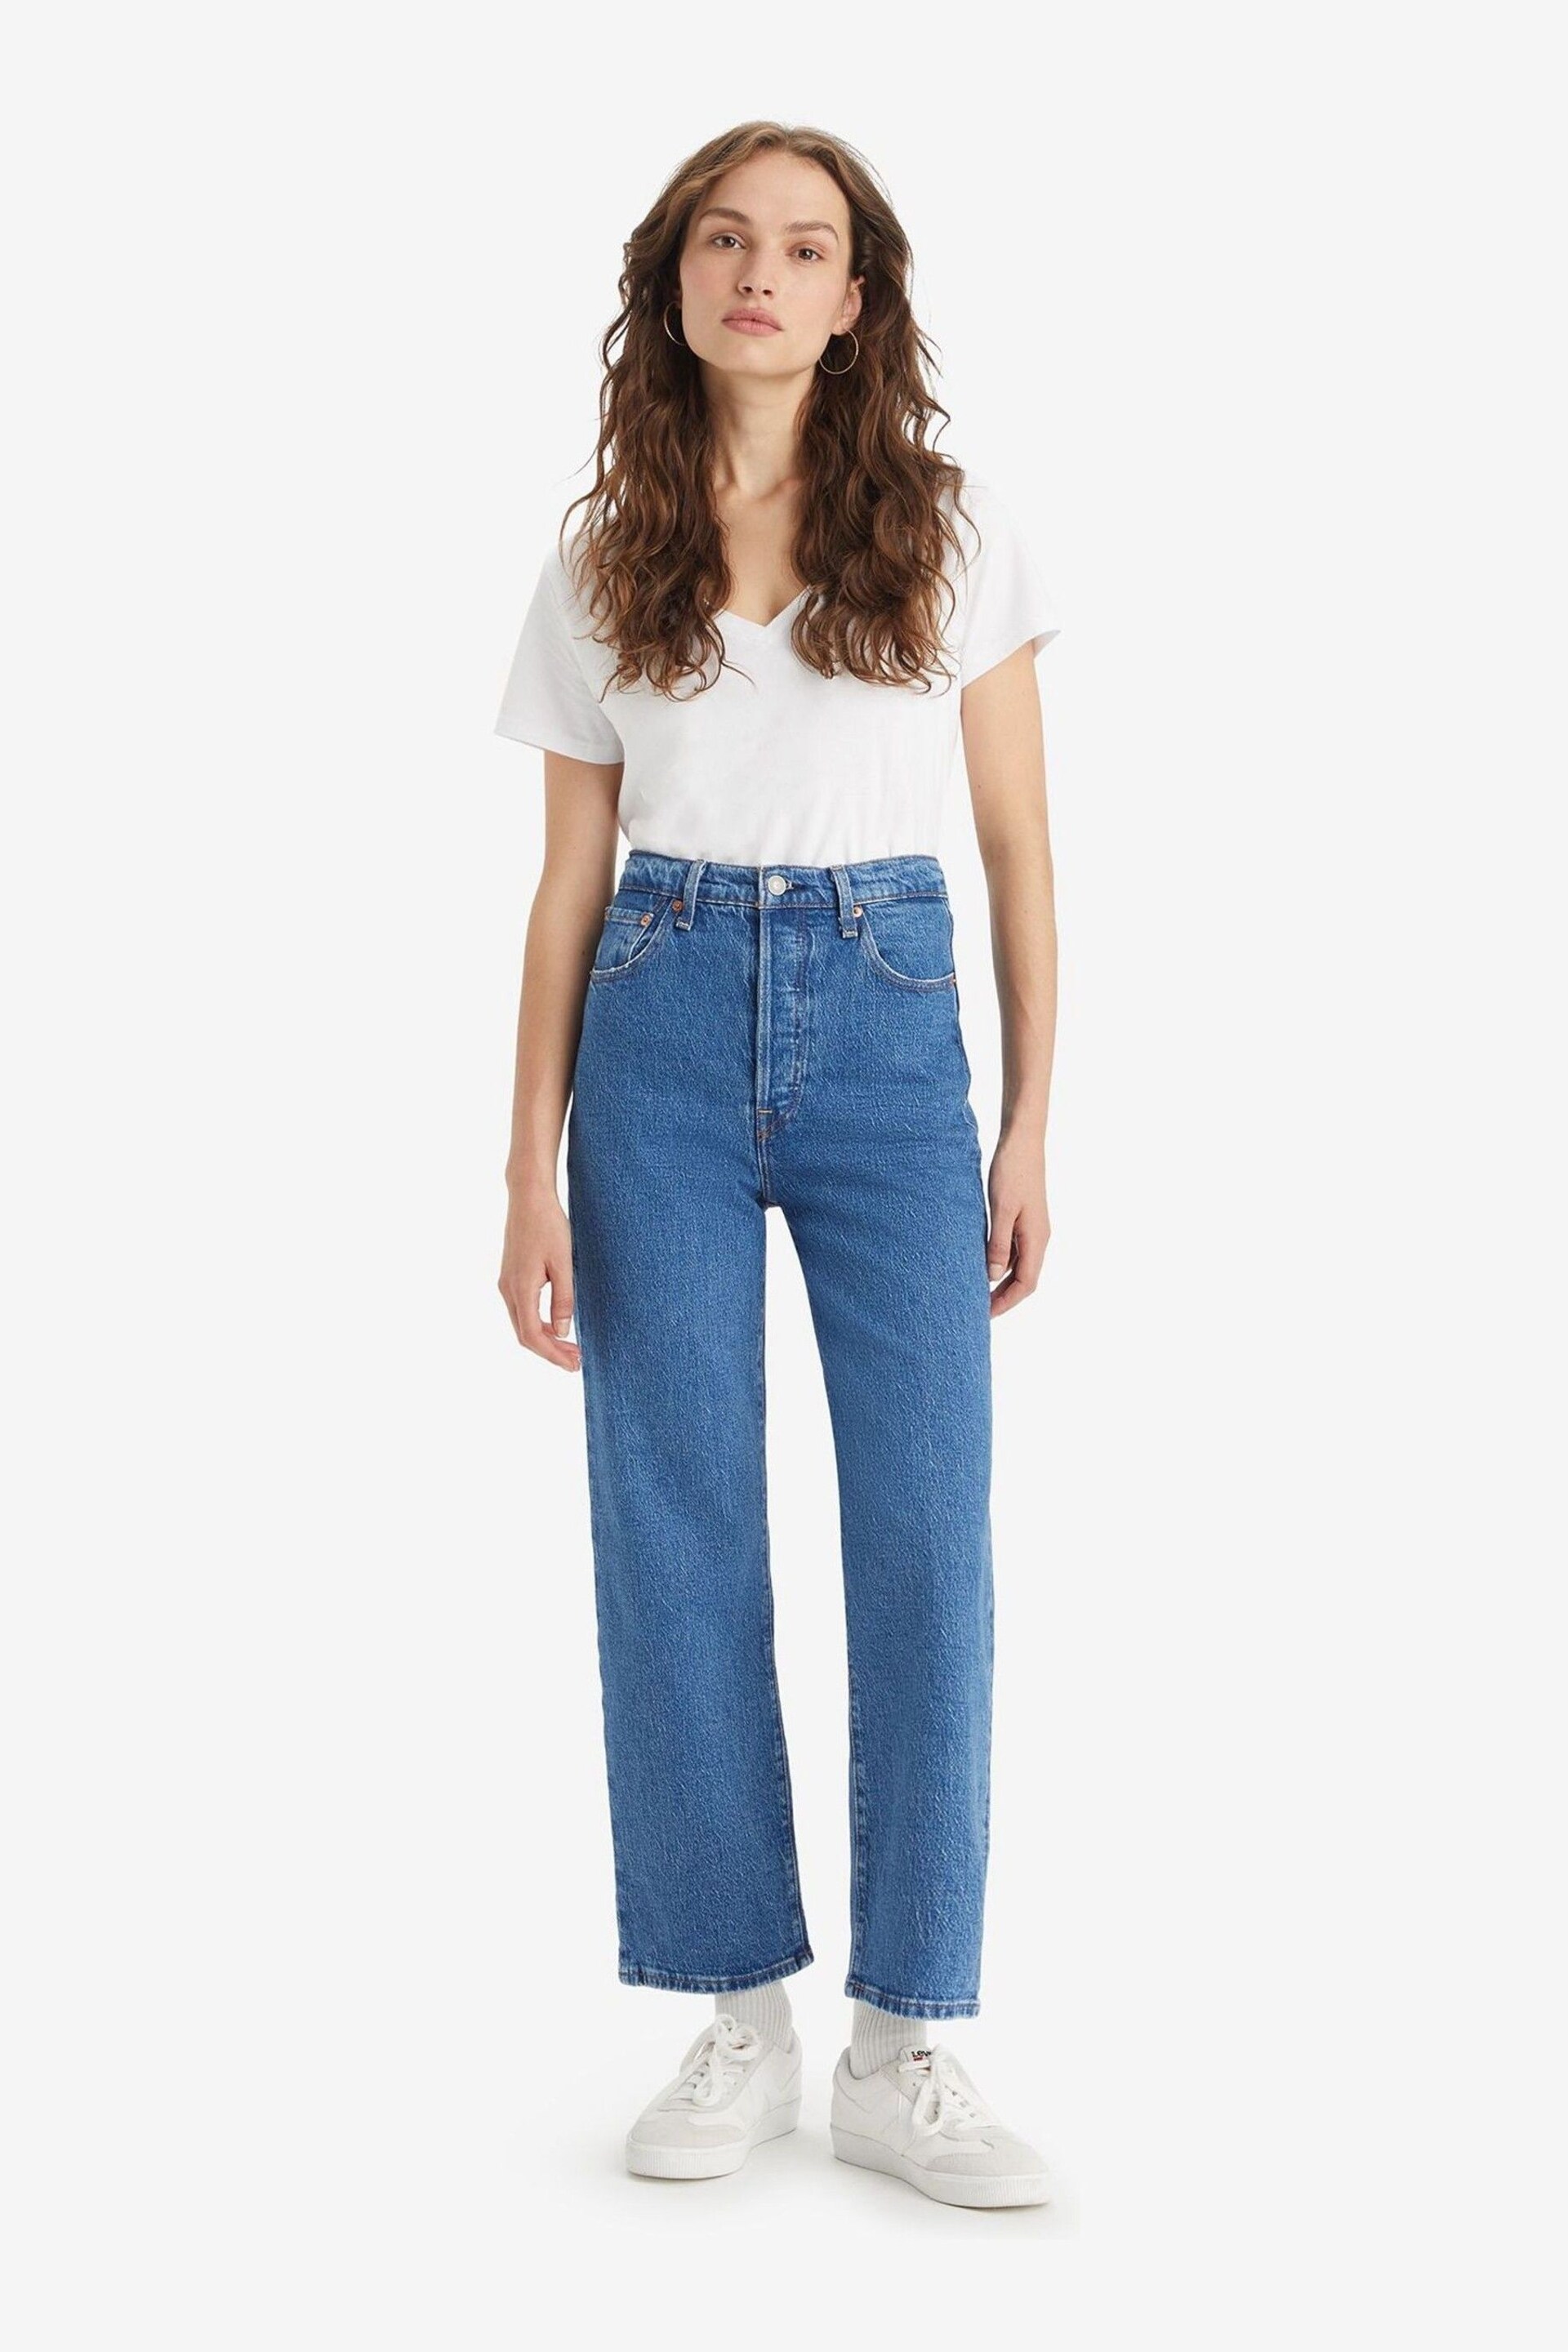 Levi's® Jazz Pop Ribcage Straight Ankle Jeans - Image 5 of 14